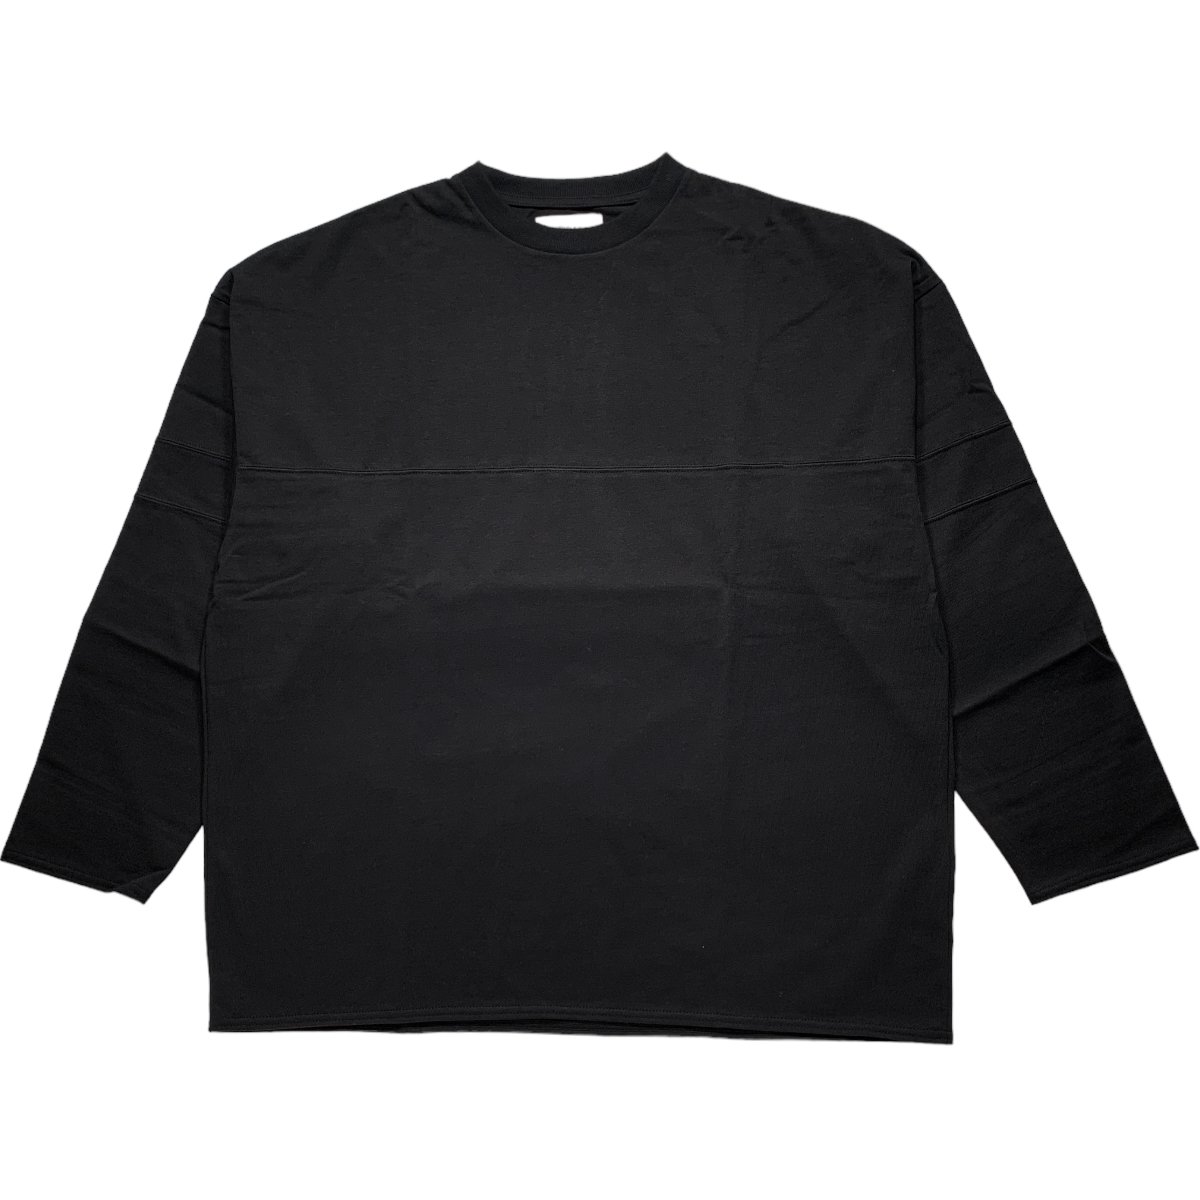 marka <BR>FOOTBALL TEE L/S - 14/- RECYCLE SUVIN ORGANIC COTTON KNIT -(BLACK)